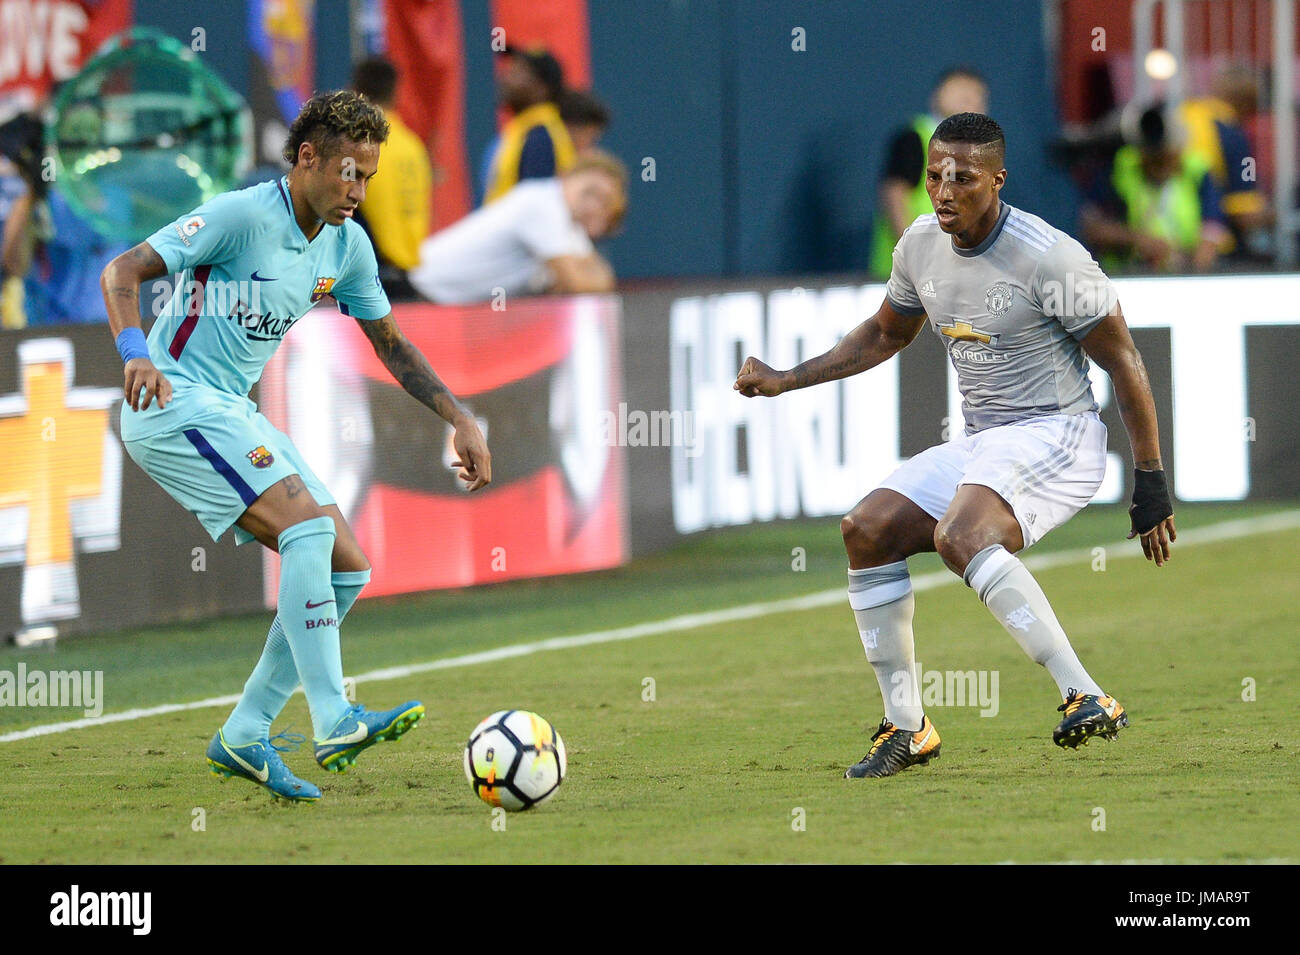 Landover, Maryland, USA. 26th July, 2017. Barcelona Forward NEYMAR (11) in action against Manchester United's ANTONIO VALENCIA (25) during the first half of the game held at FEDEXFIELD in Landover, Maryland. Credit: Amy Sanderson/ZUMA Wire/Alamy Live News Stock Photo